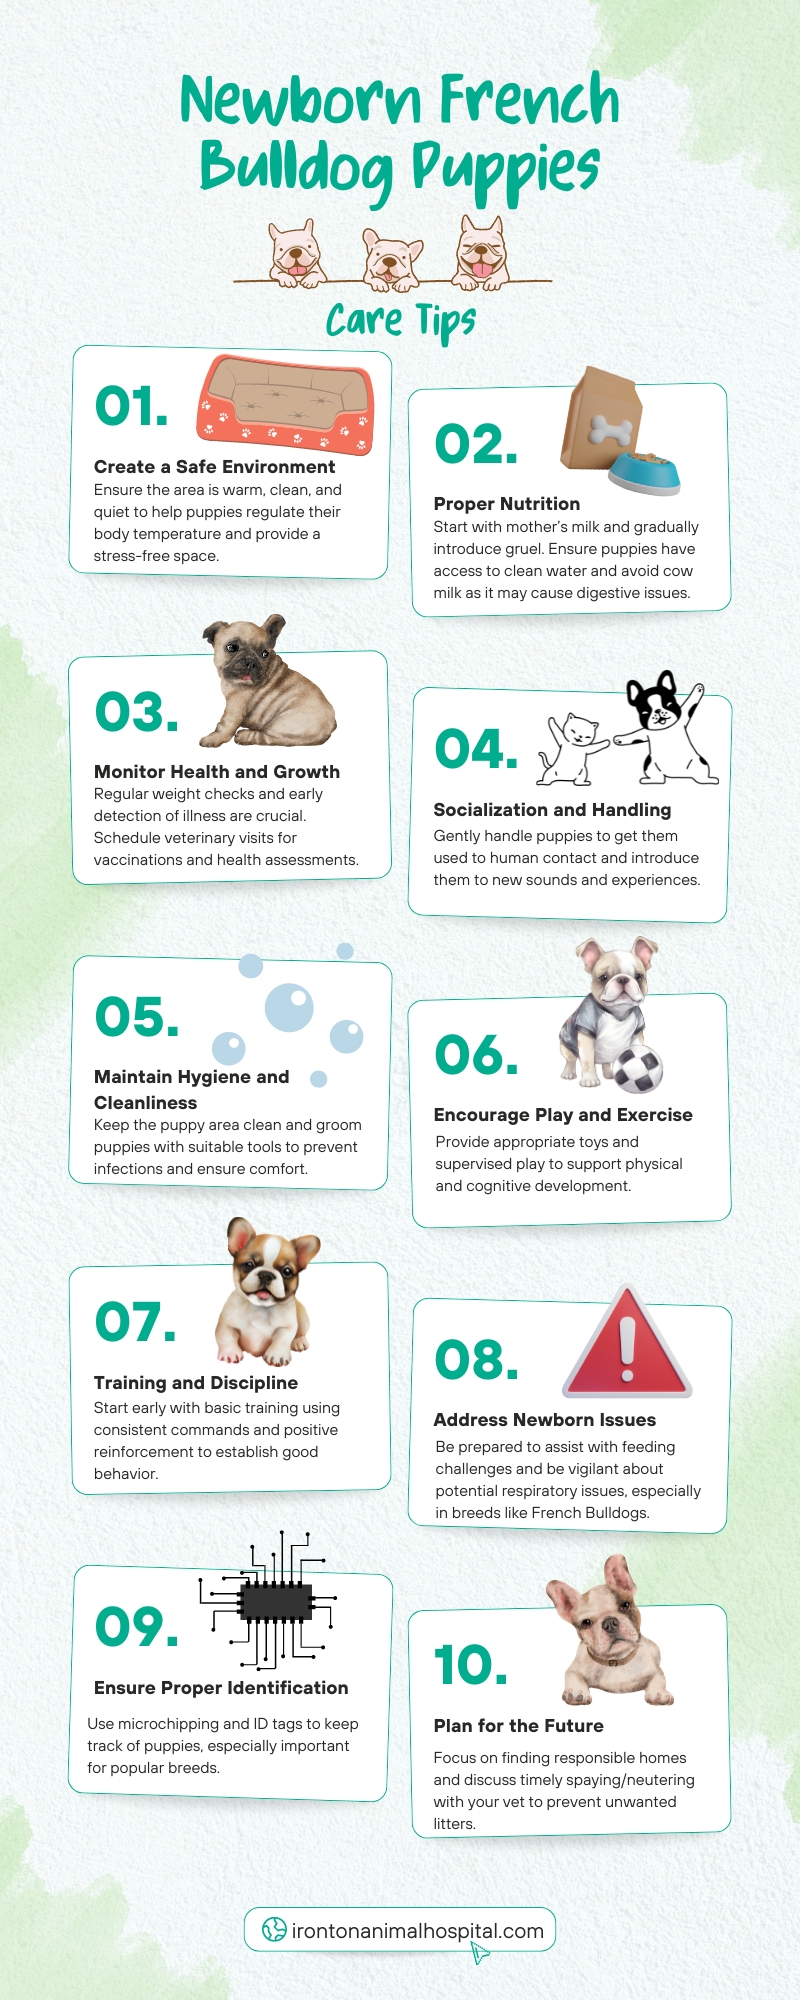 Caring for Newborn French Bulldog Puppies Infographic